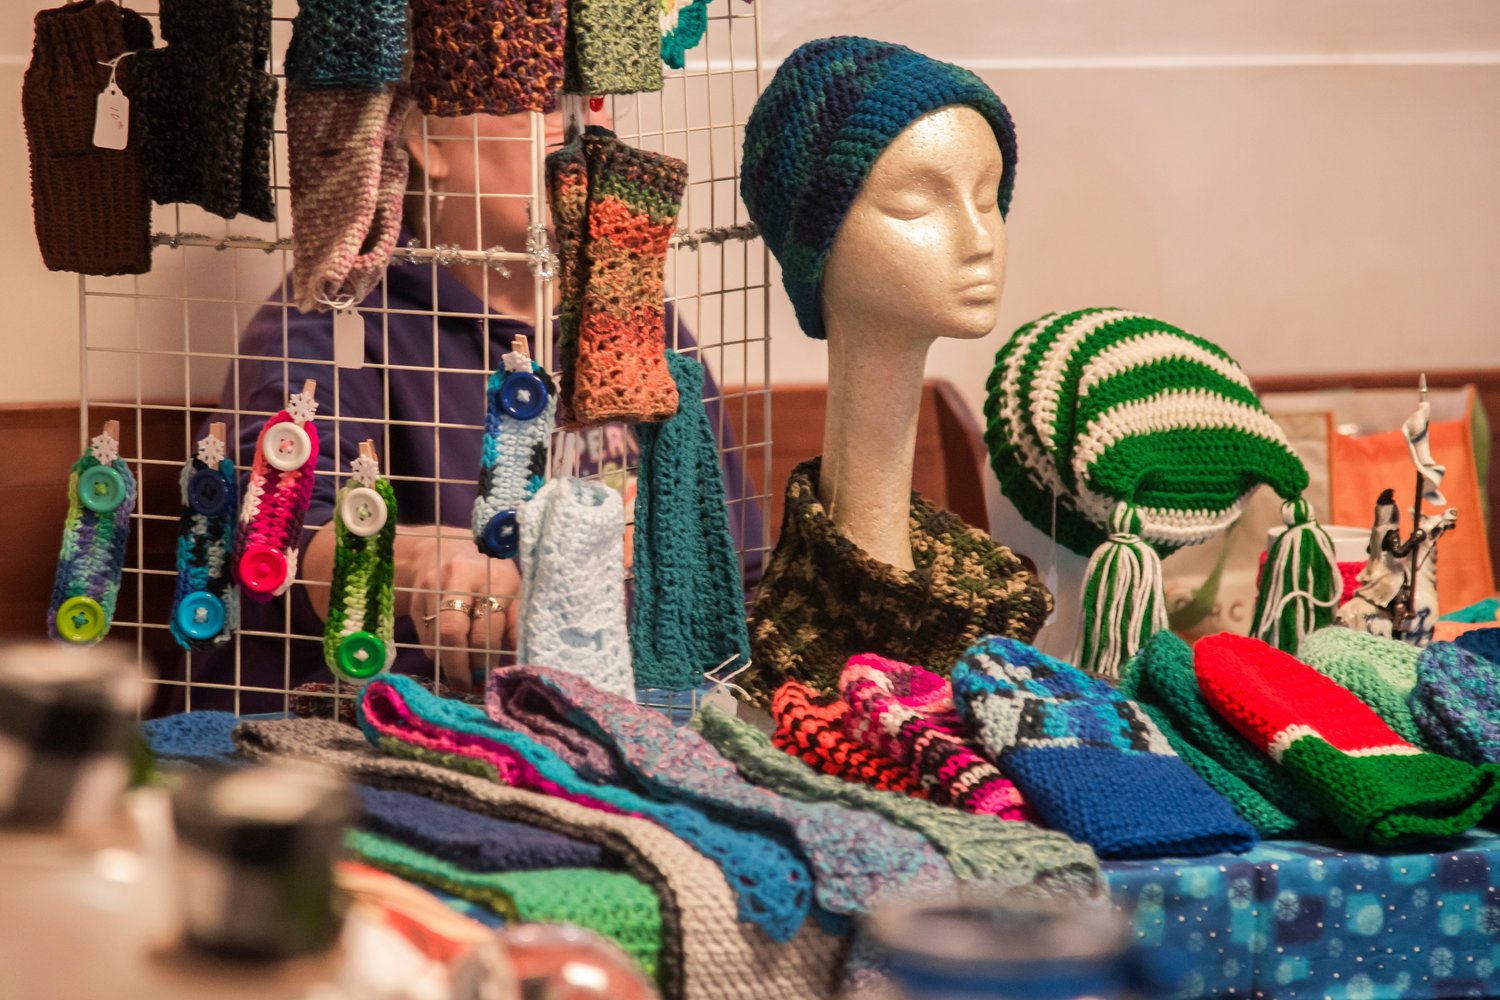 Scarves, beanies and other knitted items are displayed inside the Adna Grange Hall on tables and racks Saturday afternoon during a Fall Bazaar.